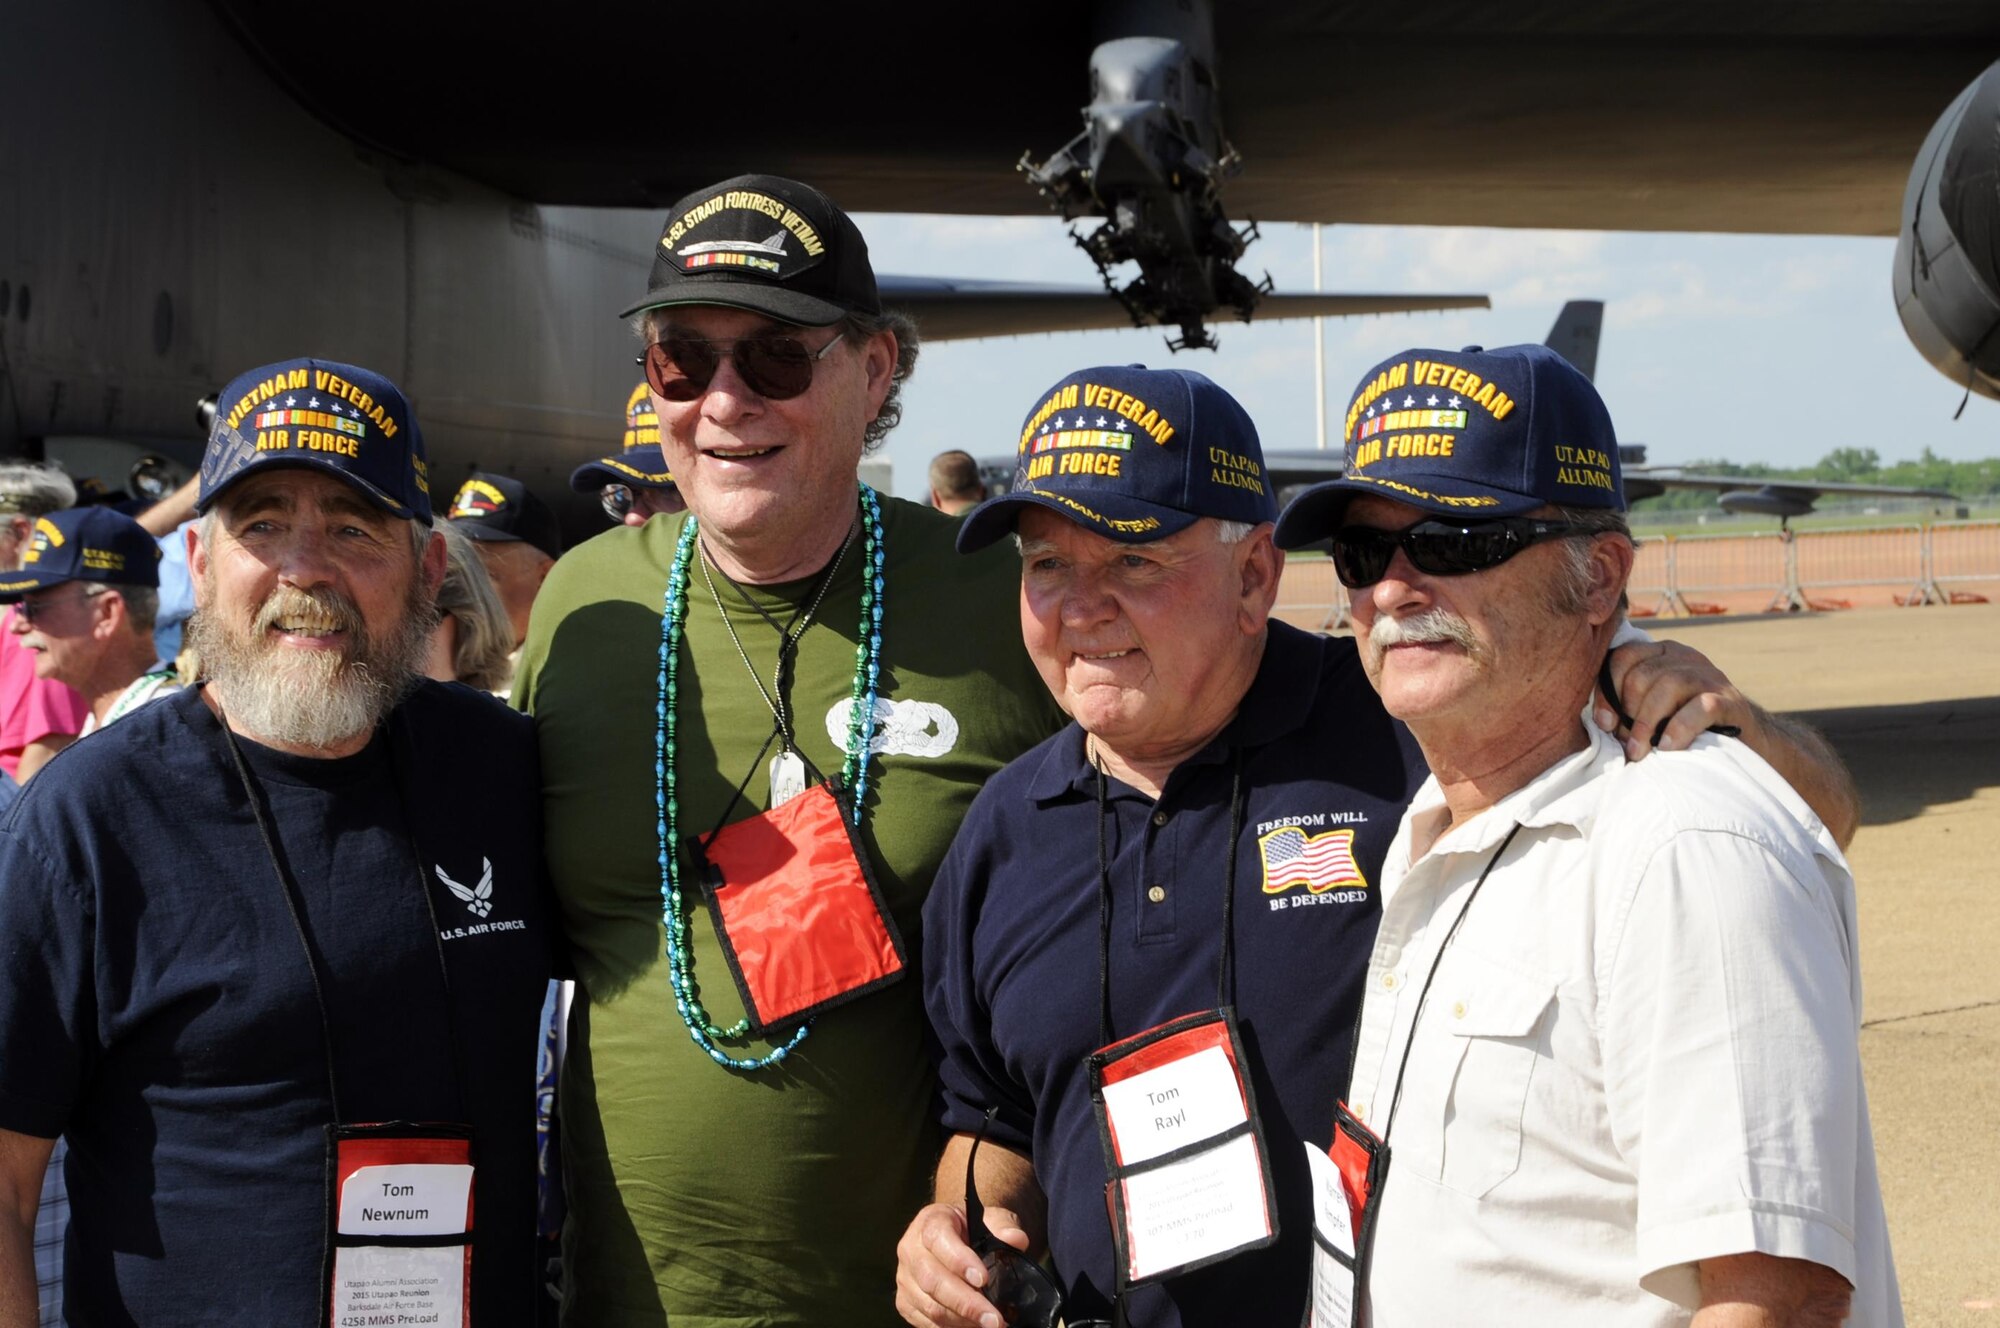 Four friends reunite at the dedication of a B-52, the Lone Star Lady II, in memoriam to the Vietnam Veterans at the Defenders of Liberty Air Show at Barksdale Air Force Base, La. on May 1, 2015. The veterans were surprised with the unveiling of the new nose art on the B-52. The original Lone Star Lady was a B-52 that flew over Vietnam during Strategic Air Command’s Operation Linebacker II in 1972. (U.S. Air Force photo by Master Sgt. Laura Siebert)